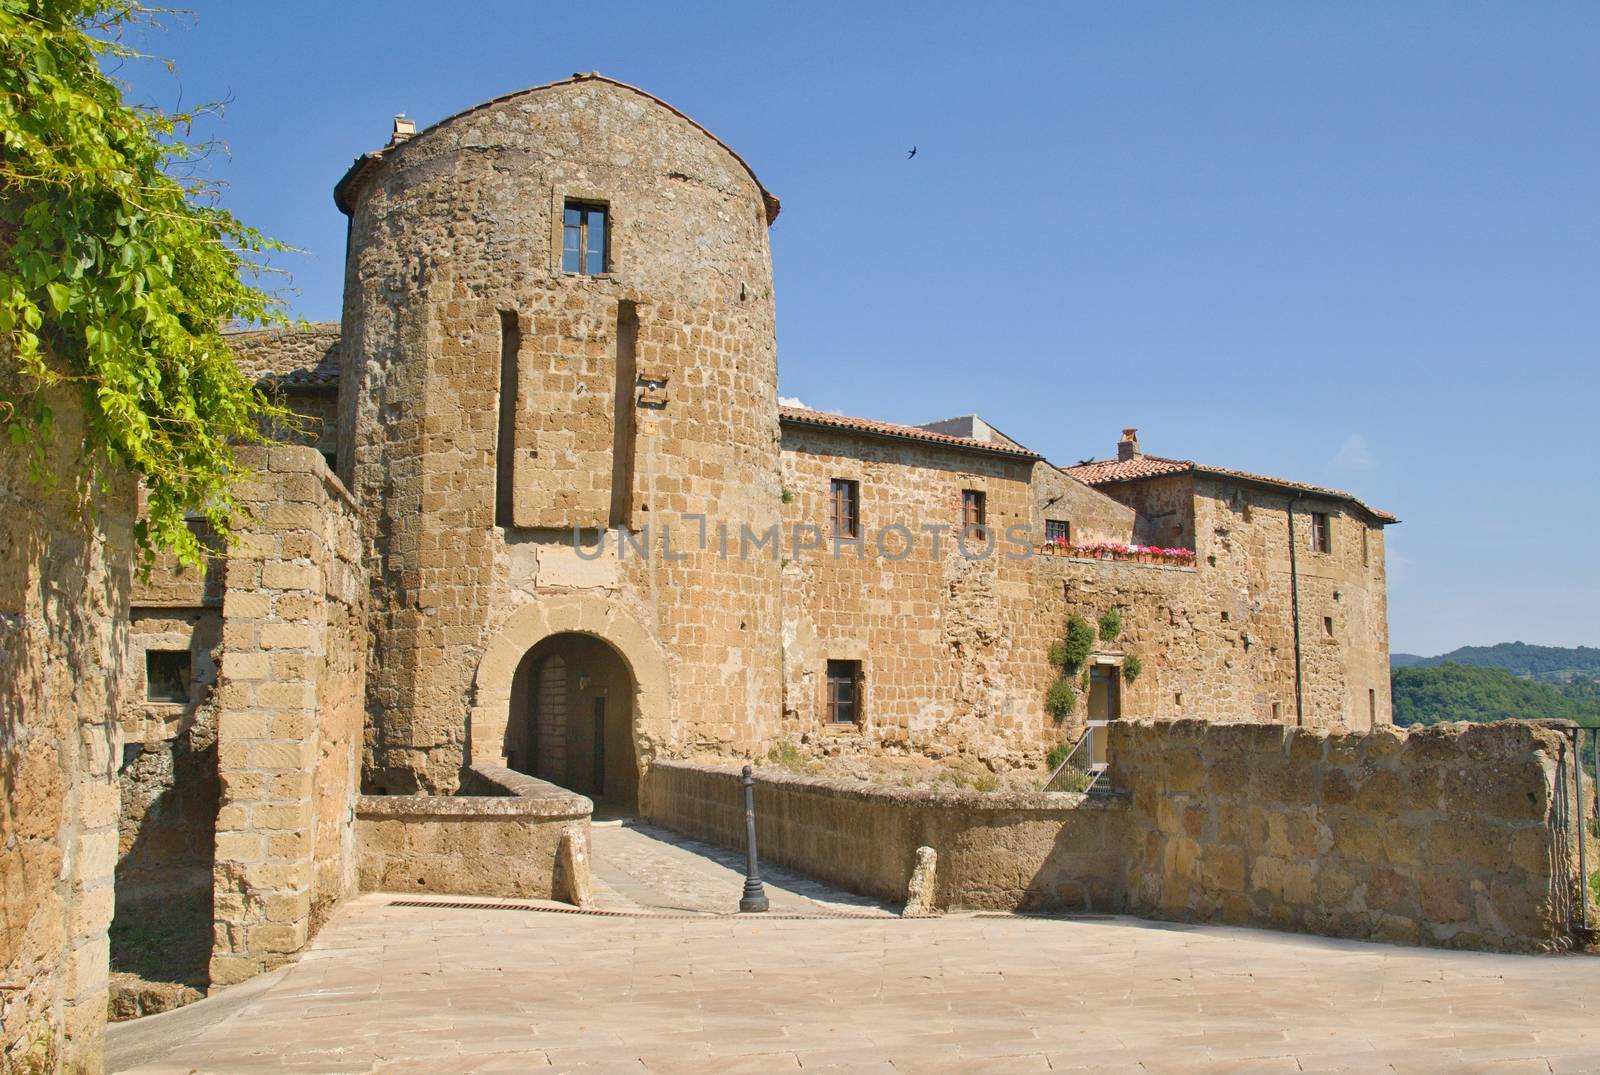 Photo shows a general view of the Tuscany city of Sovana.